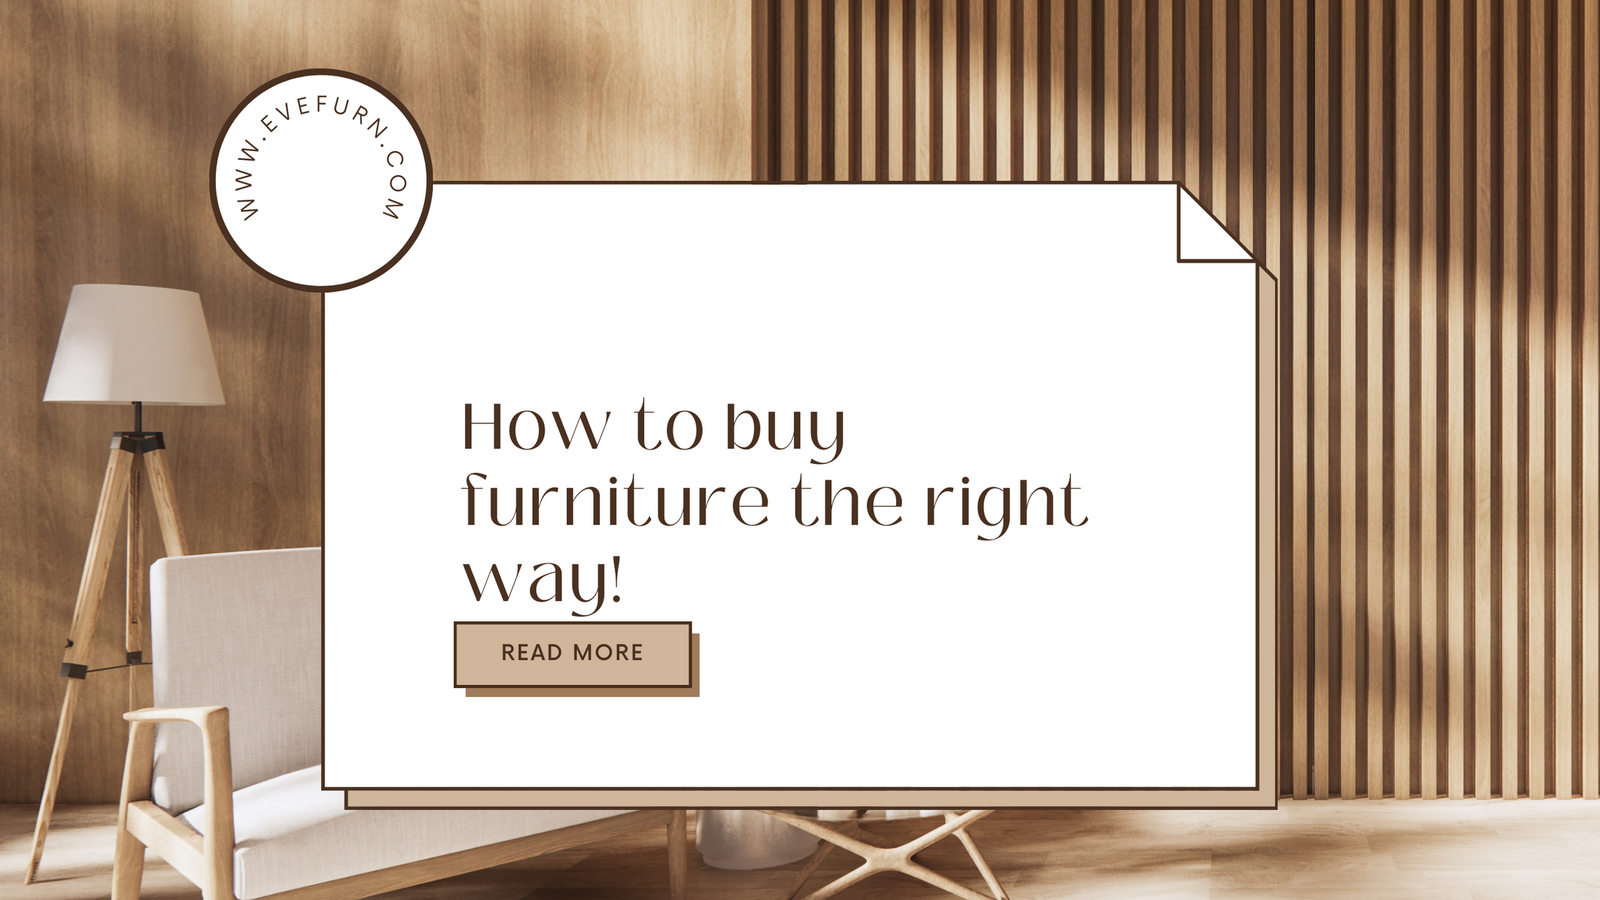 Furnishing Your Home with Style: A Guide for Furniture Shoppers